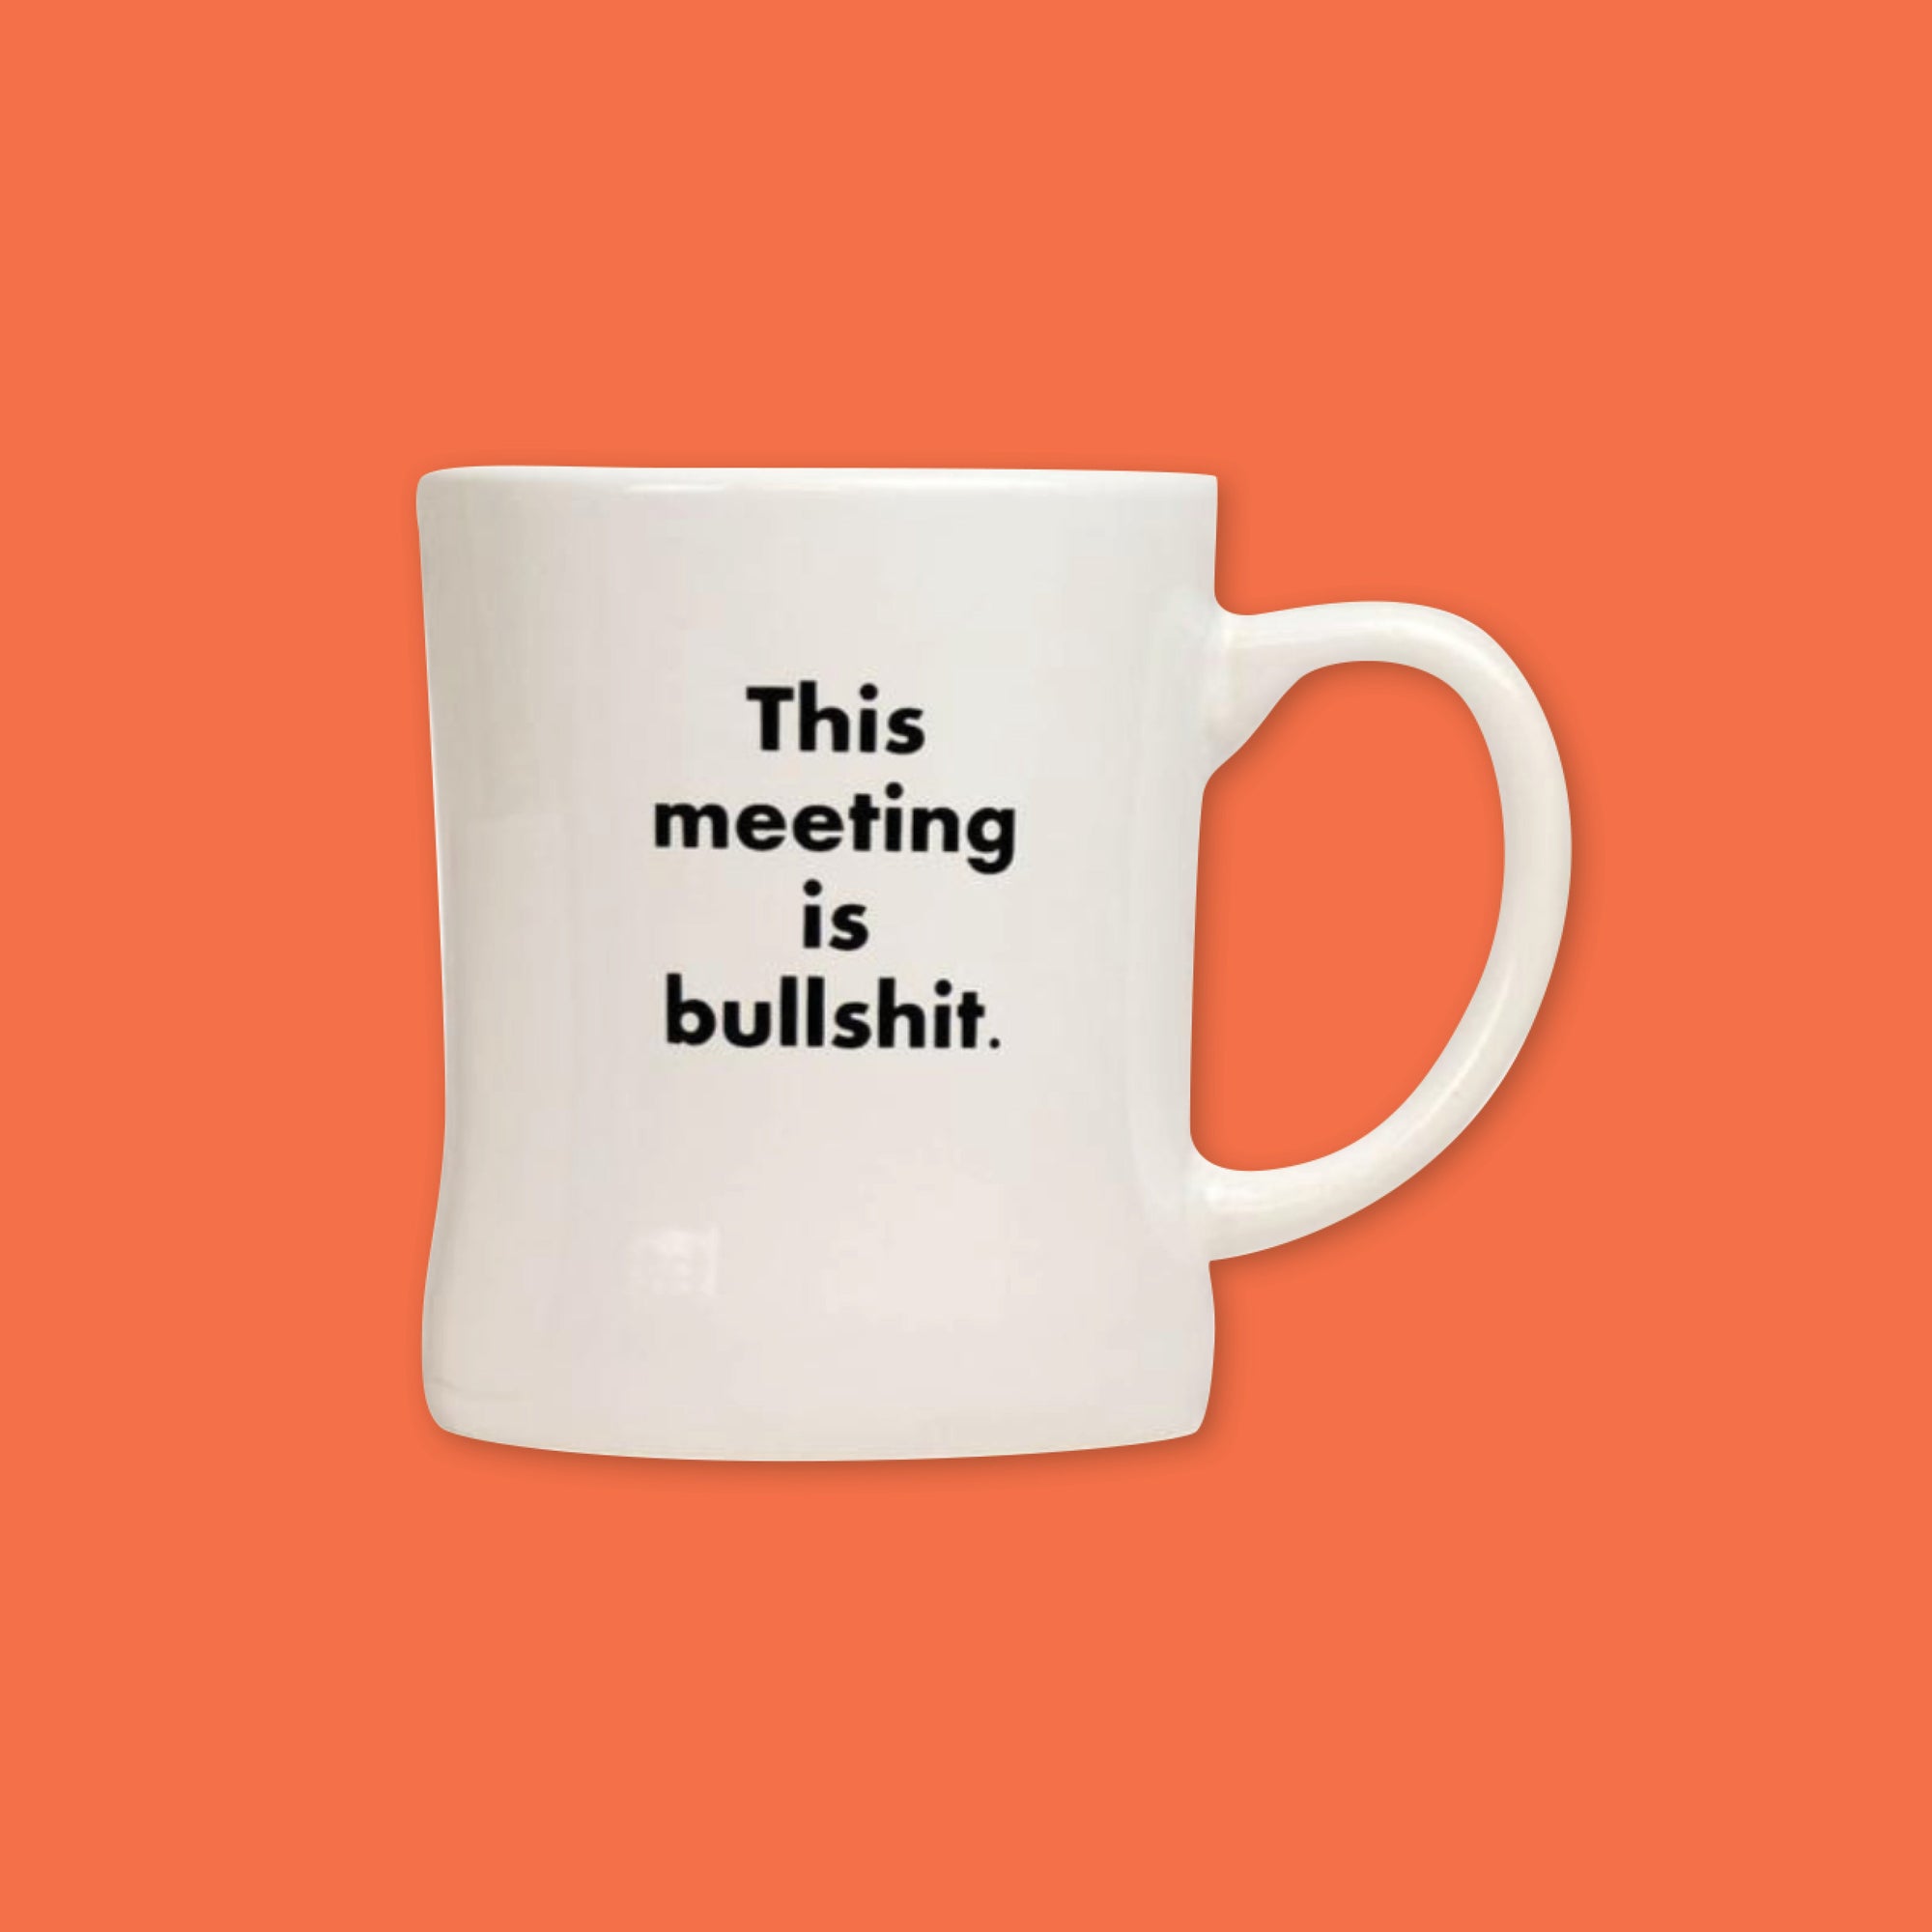 On an orangey red background is a white diner mug. On the mug is black basic type, "This meeting is bullshit."